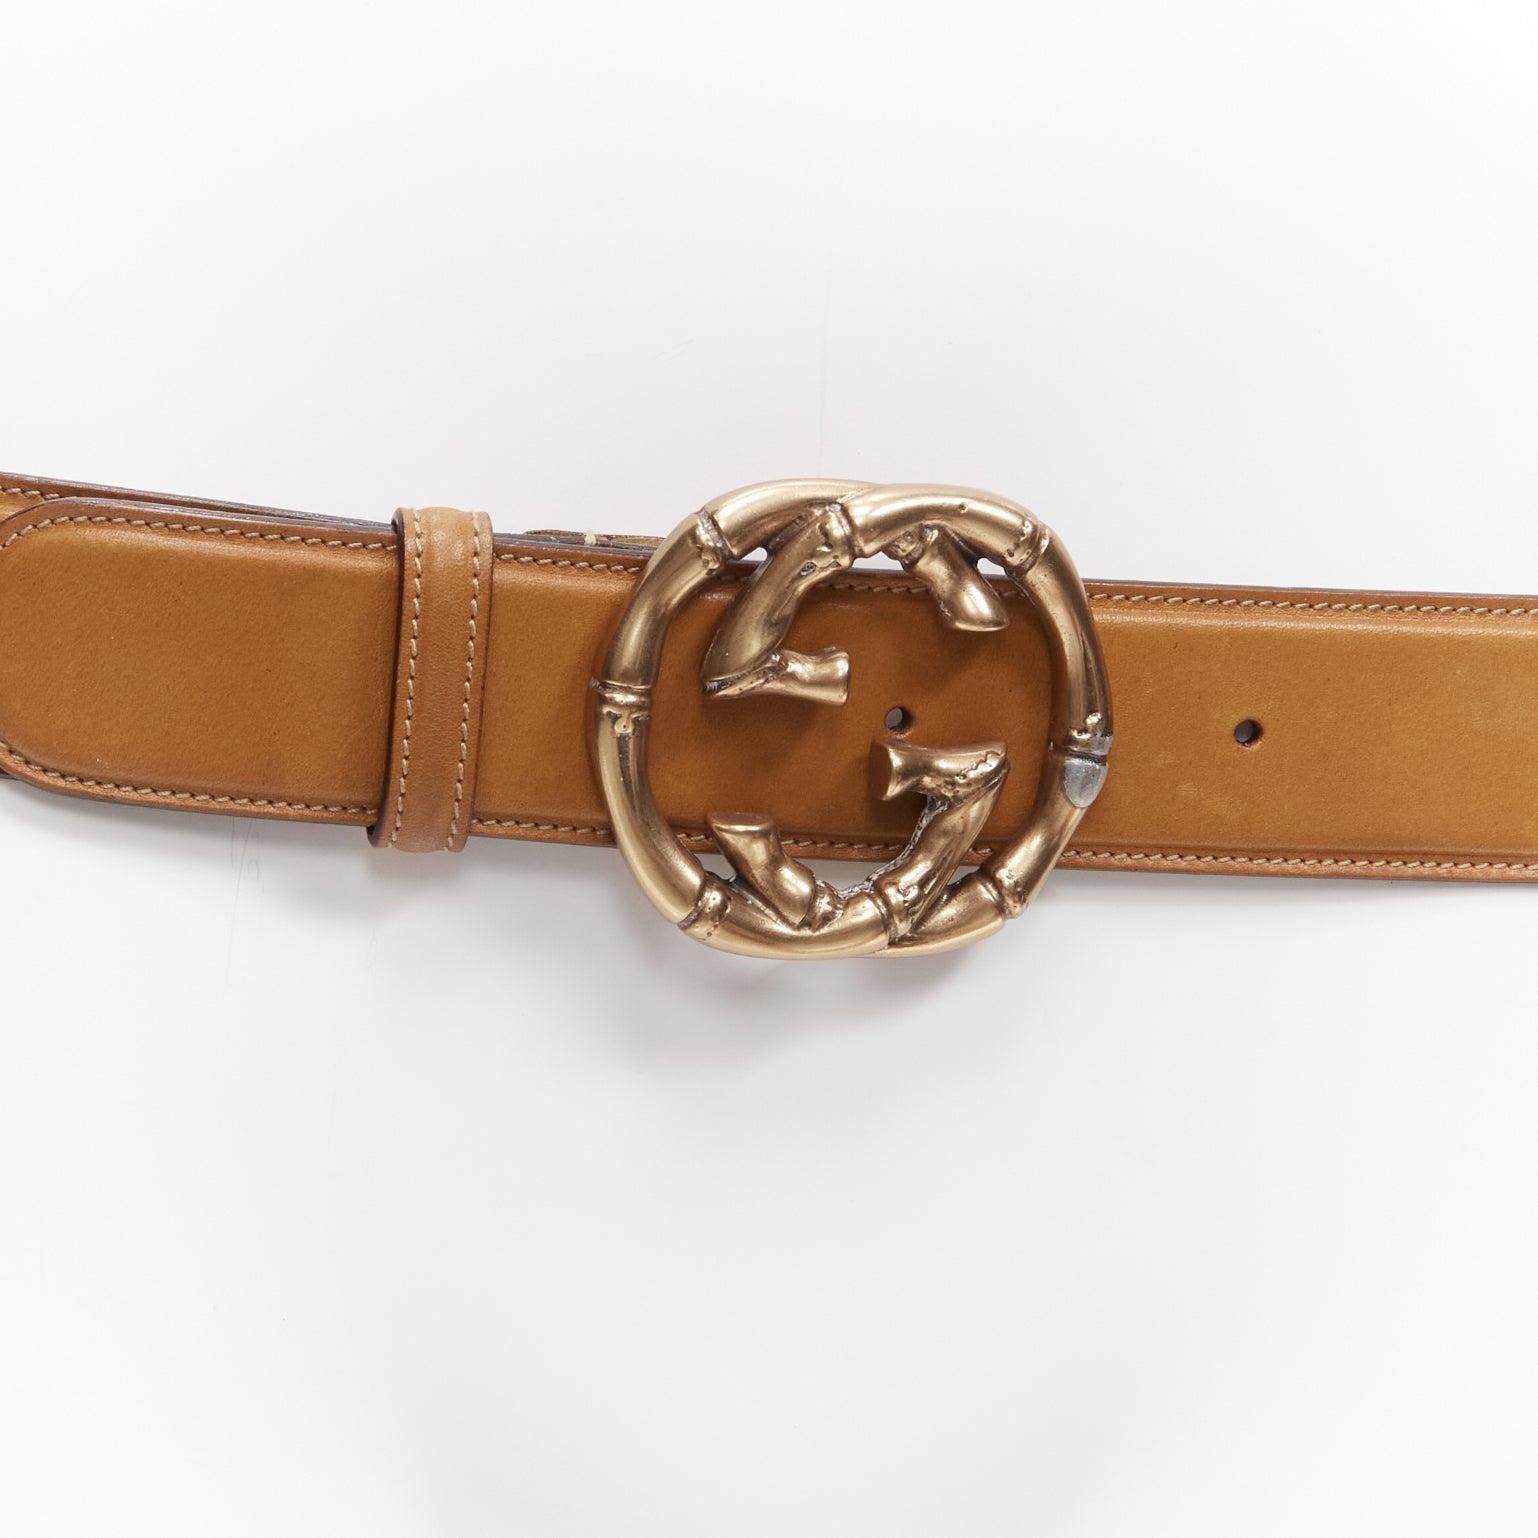 GUCCI rose gold tone bamboo GG buckle brown smooth leather belt
Reference: GIYG/A00278
Brand: Gucci
Material: Leather, Metal
Color: Brown, Rose Gold
Pattern: Solid
Closure: Belt
Lining: Brown Leather
Made in: Italy

CONDITION:
Condition: Good, this